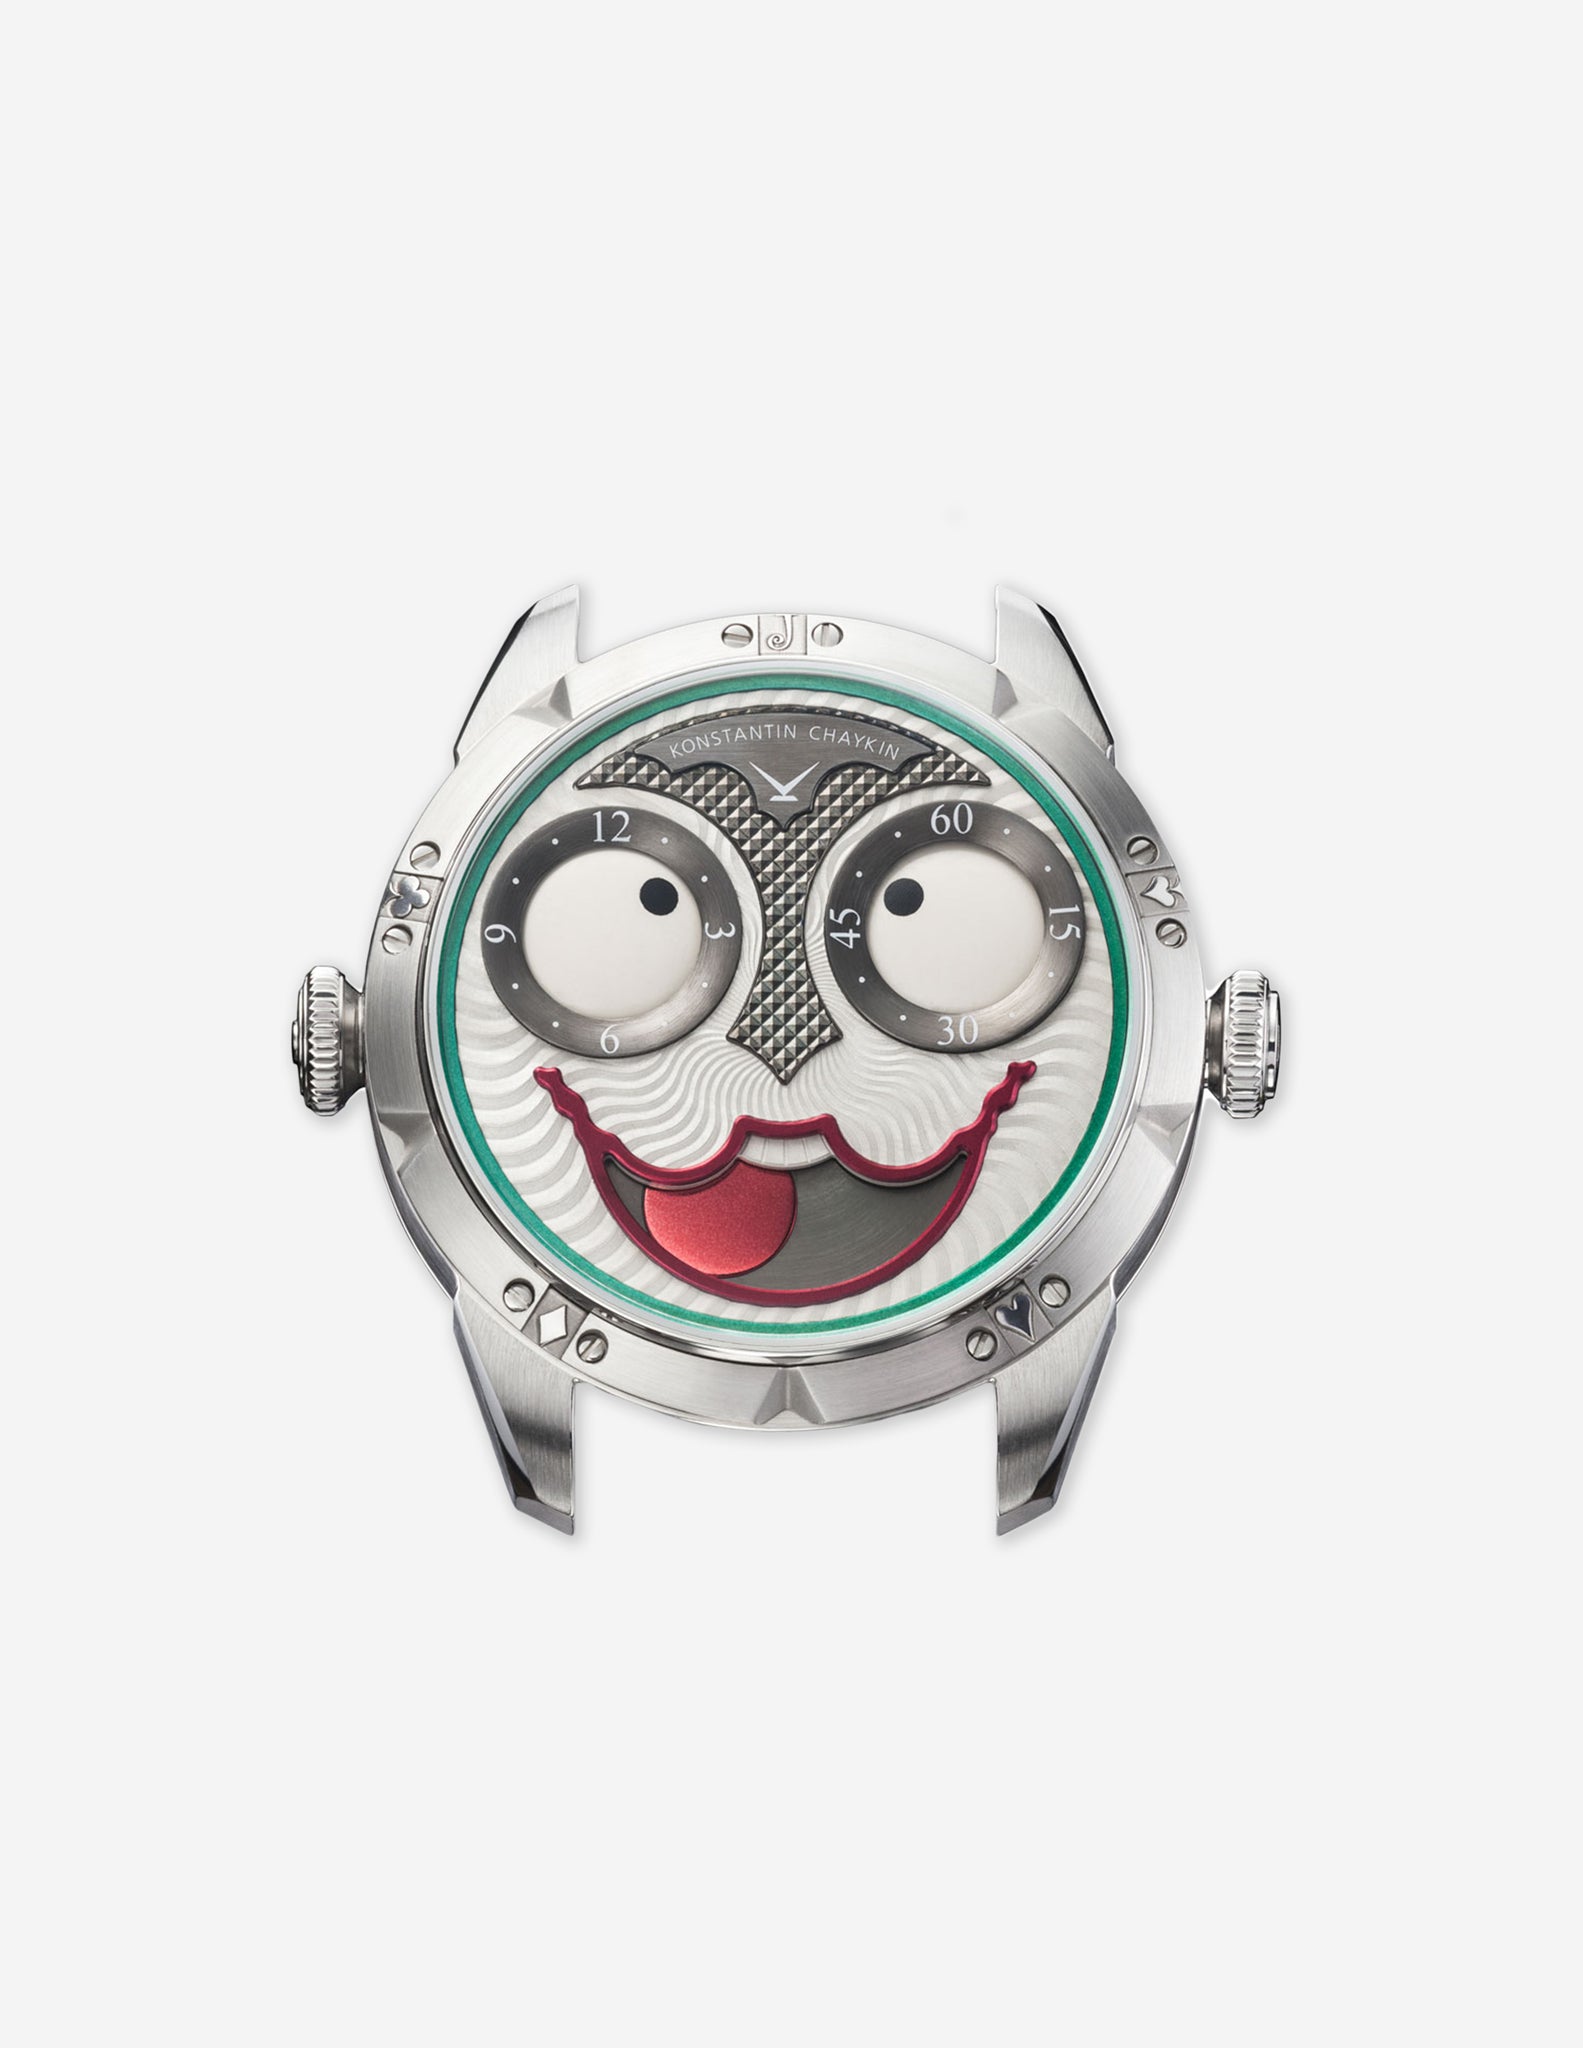 A Konstantin Chaykin Joker wristwatch with large moon phase mouth made in Russia for A Collected Man London